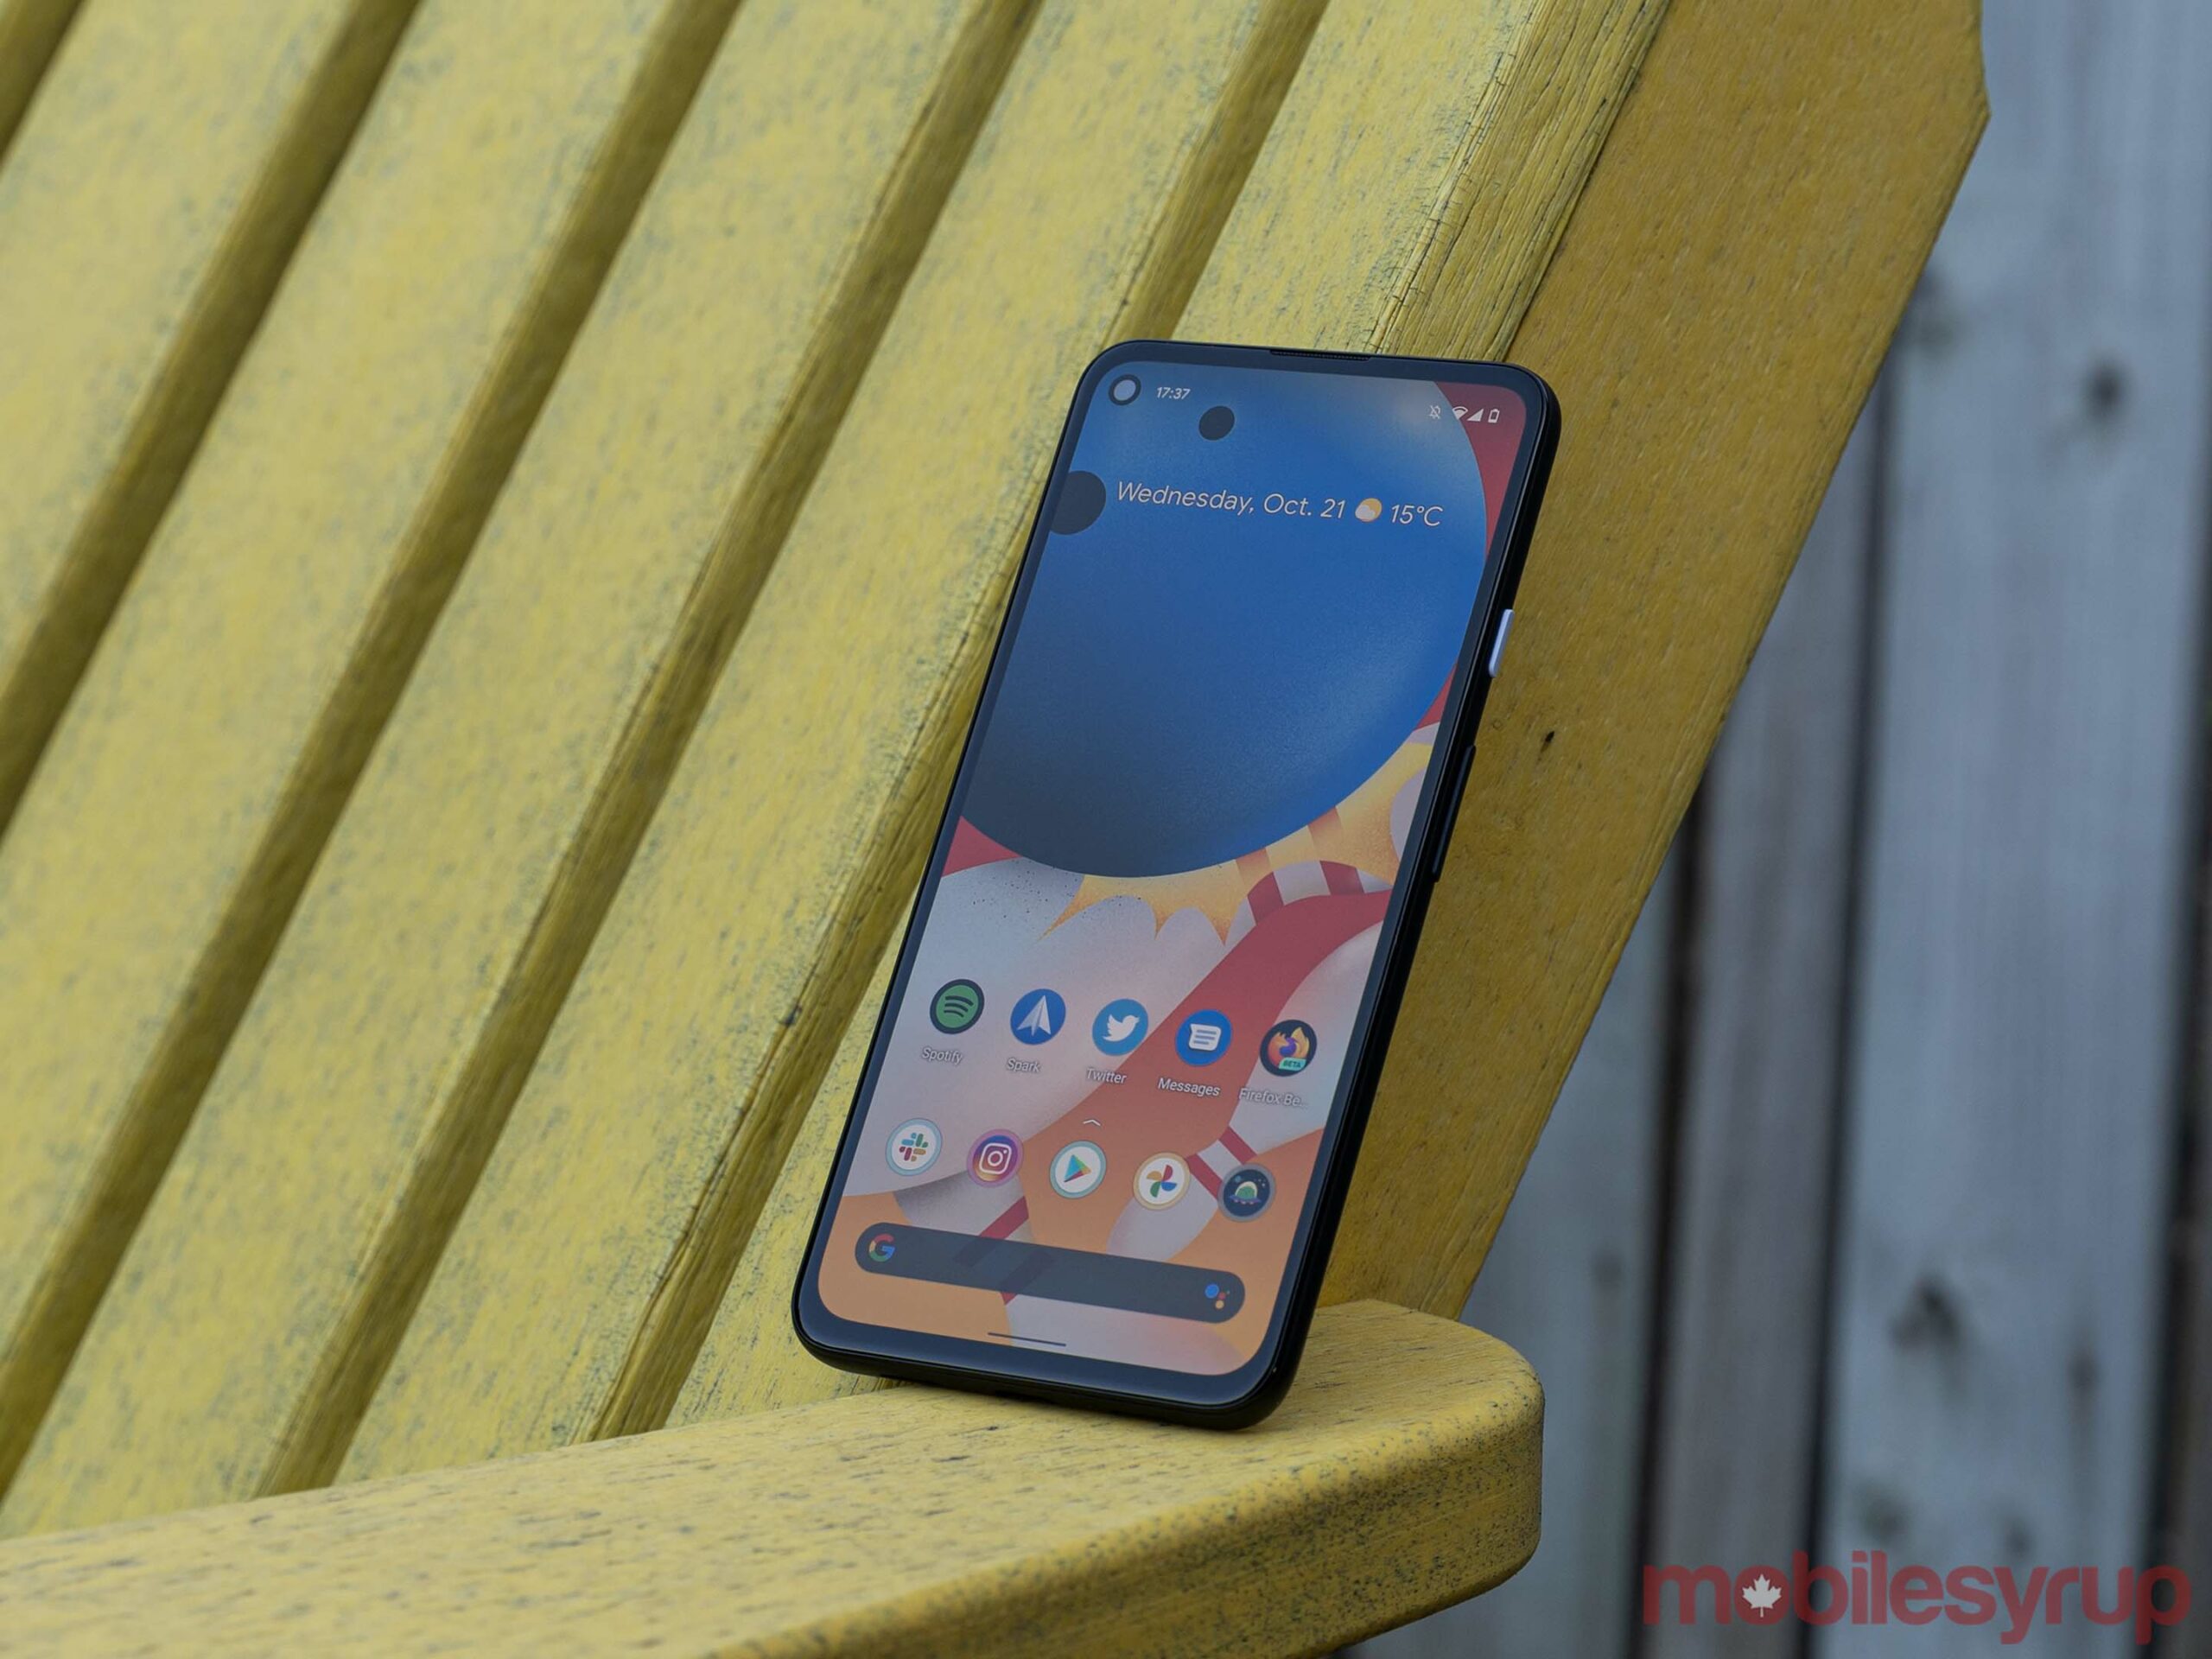 Pixel 4a 5G Review: Everything you need, nothing you don't